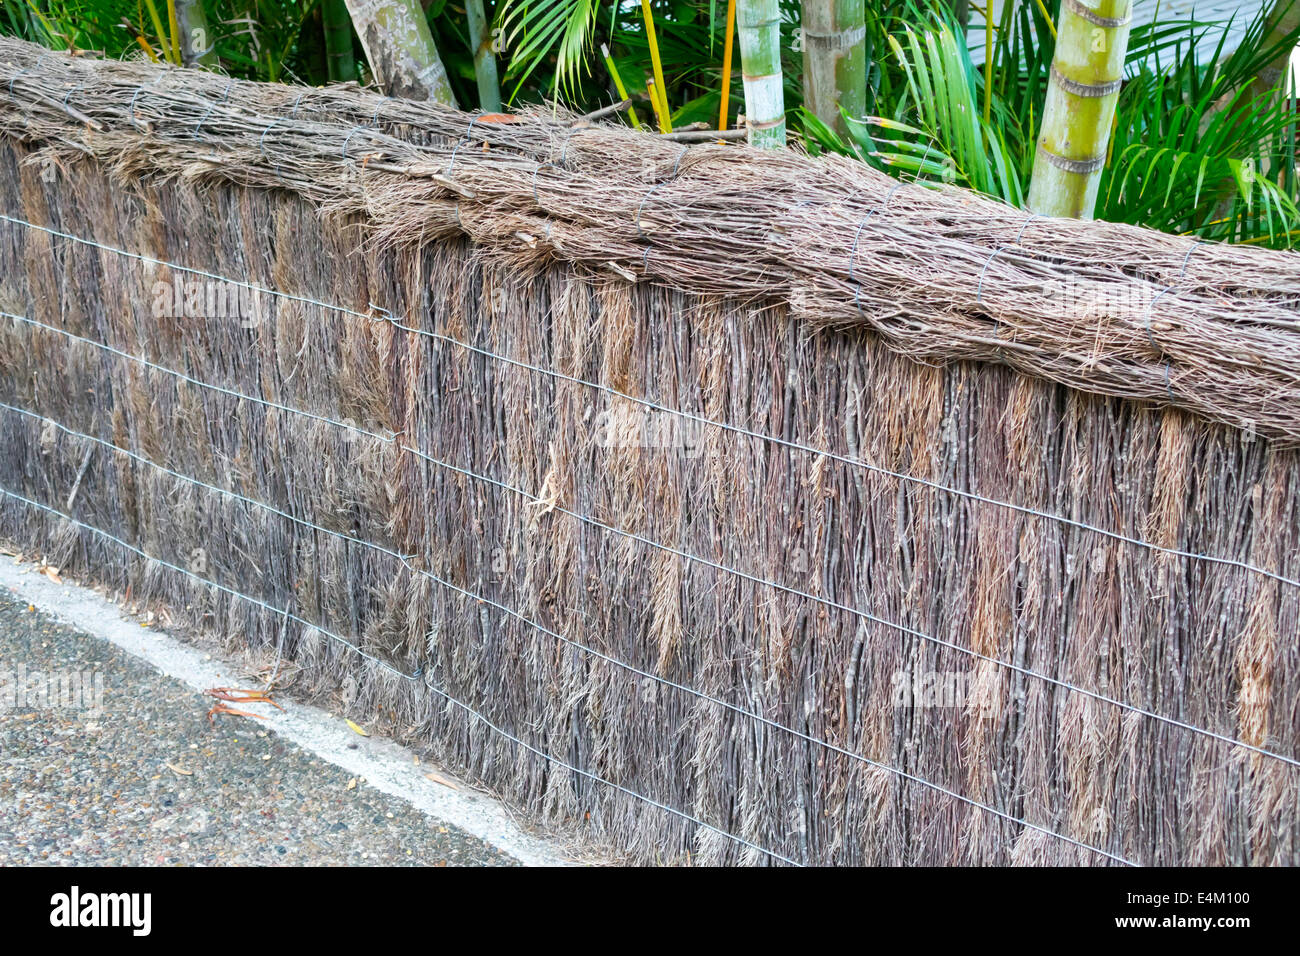 Brisbane Australia,Queensland University of Queensland,campus,wall,fence,recycled,branches,dead,repurposed,visitors travel traveling tour tourist tour Stock Photo